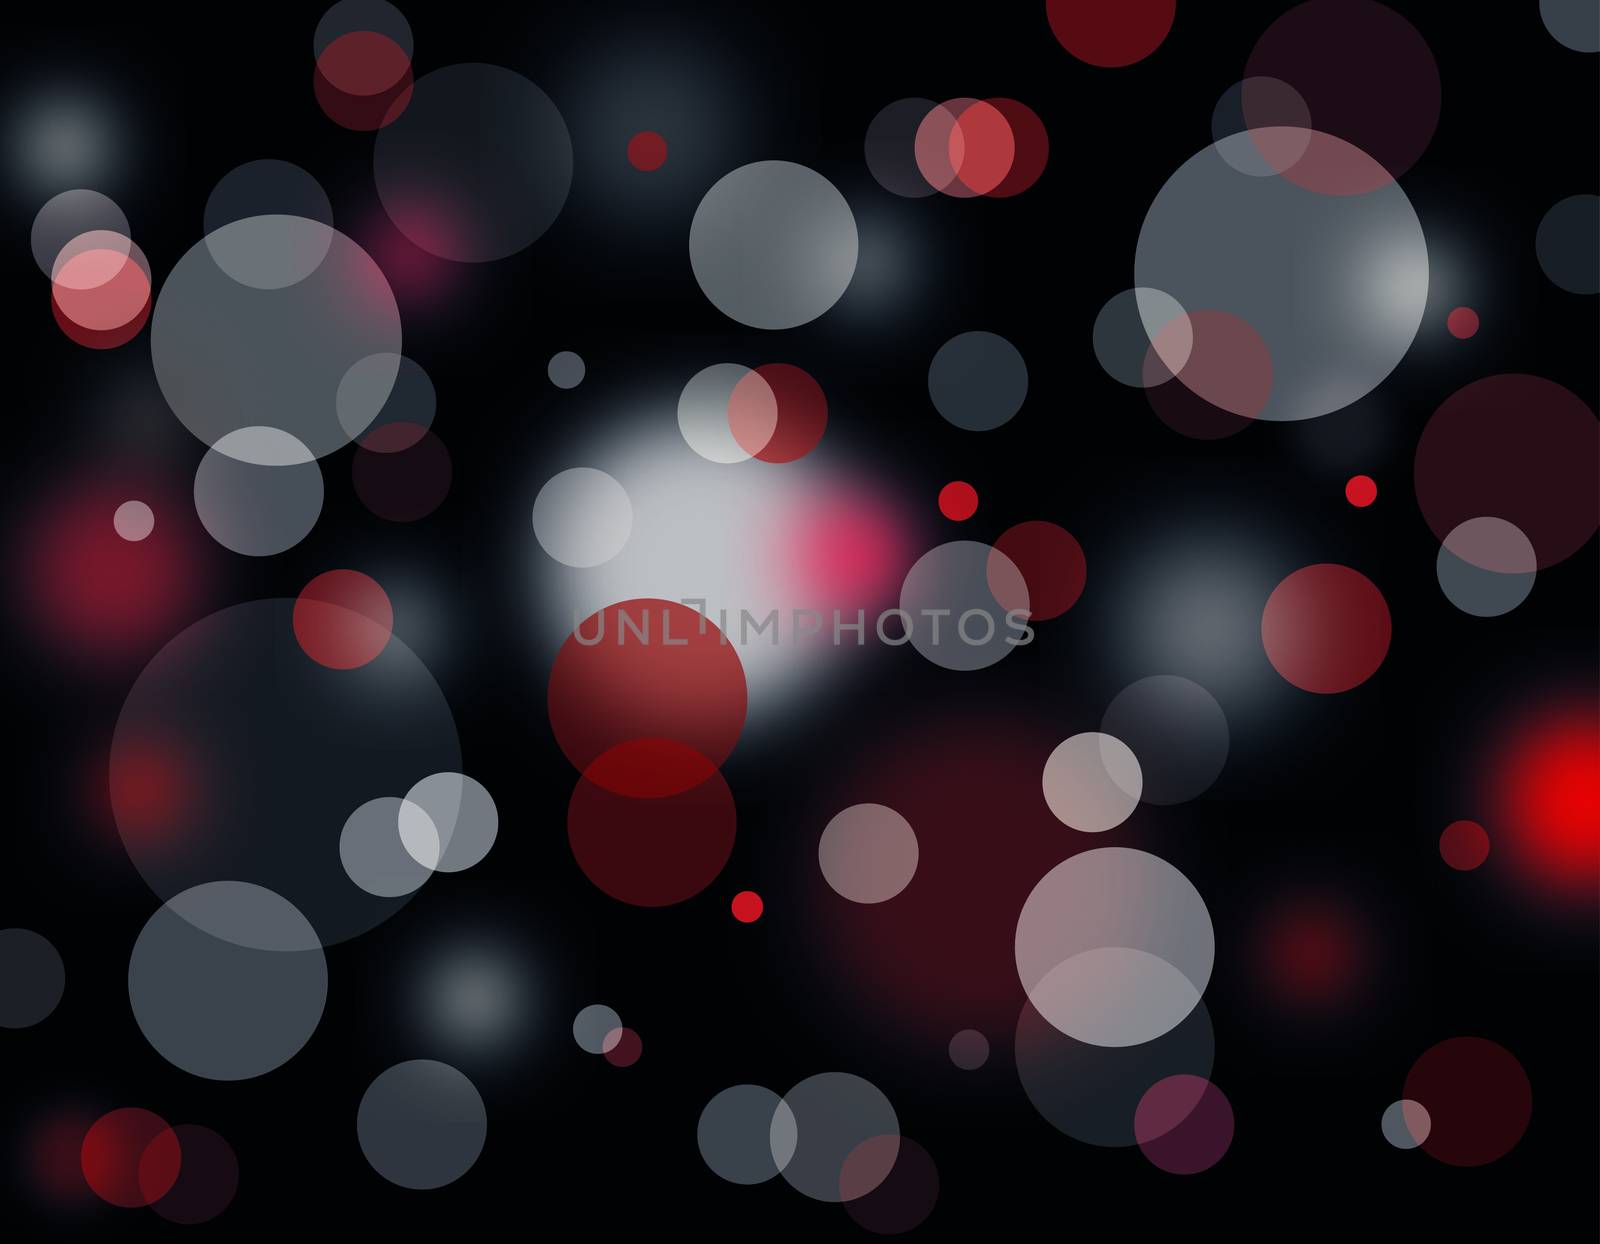 2d abstract illustration with multiple colors to be used as a background or other uses